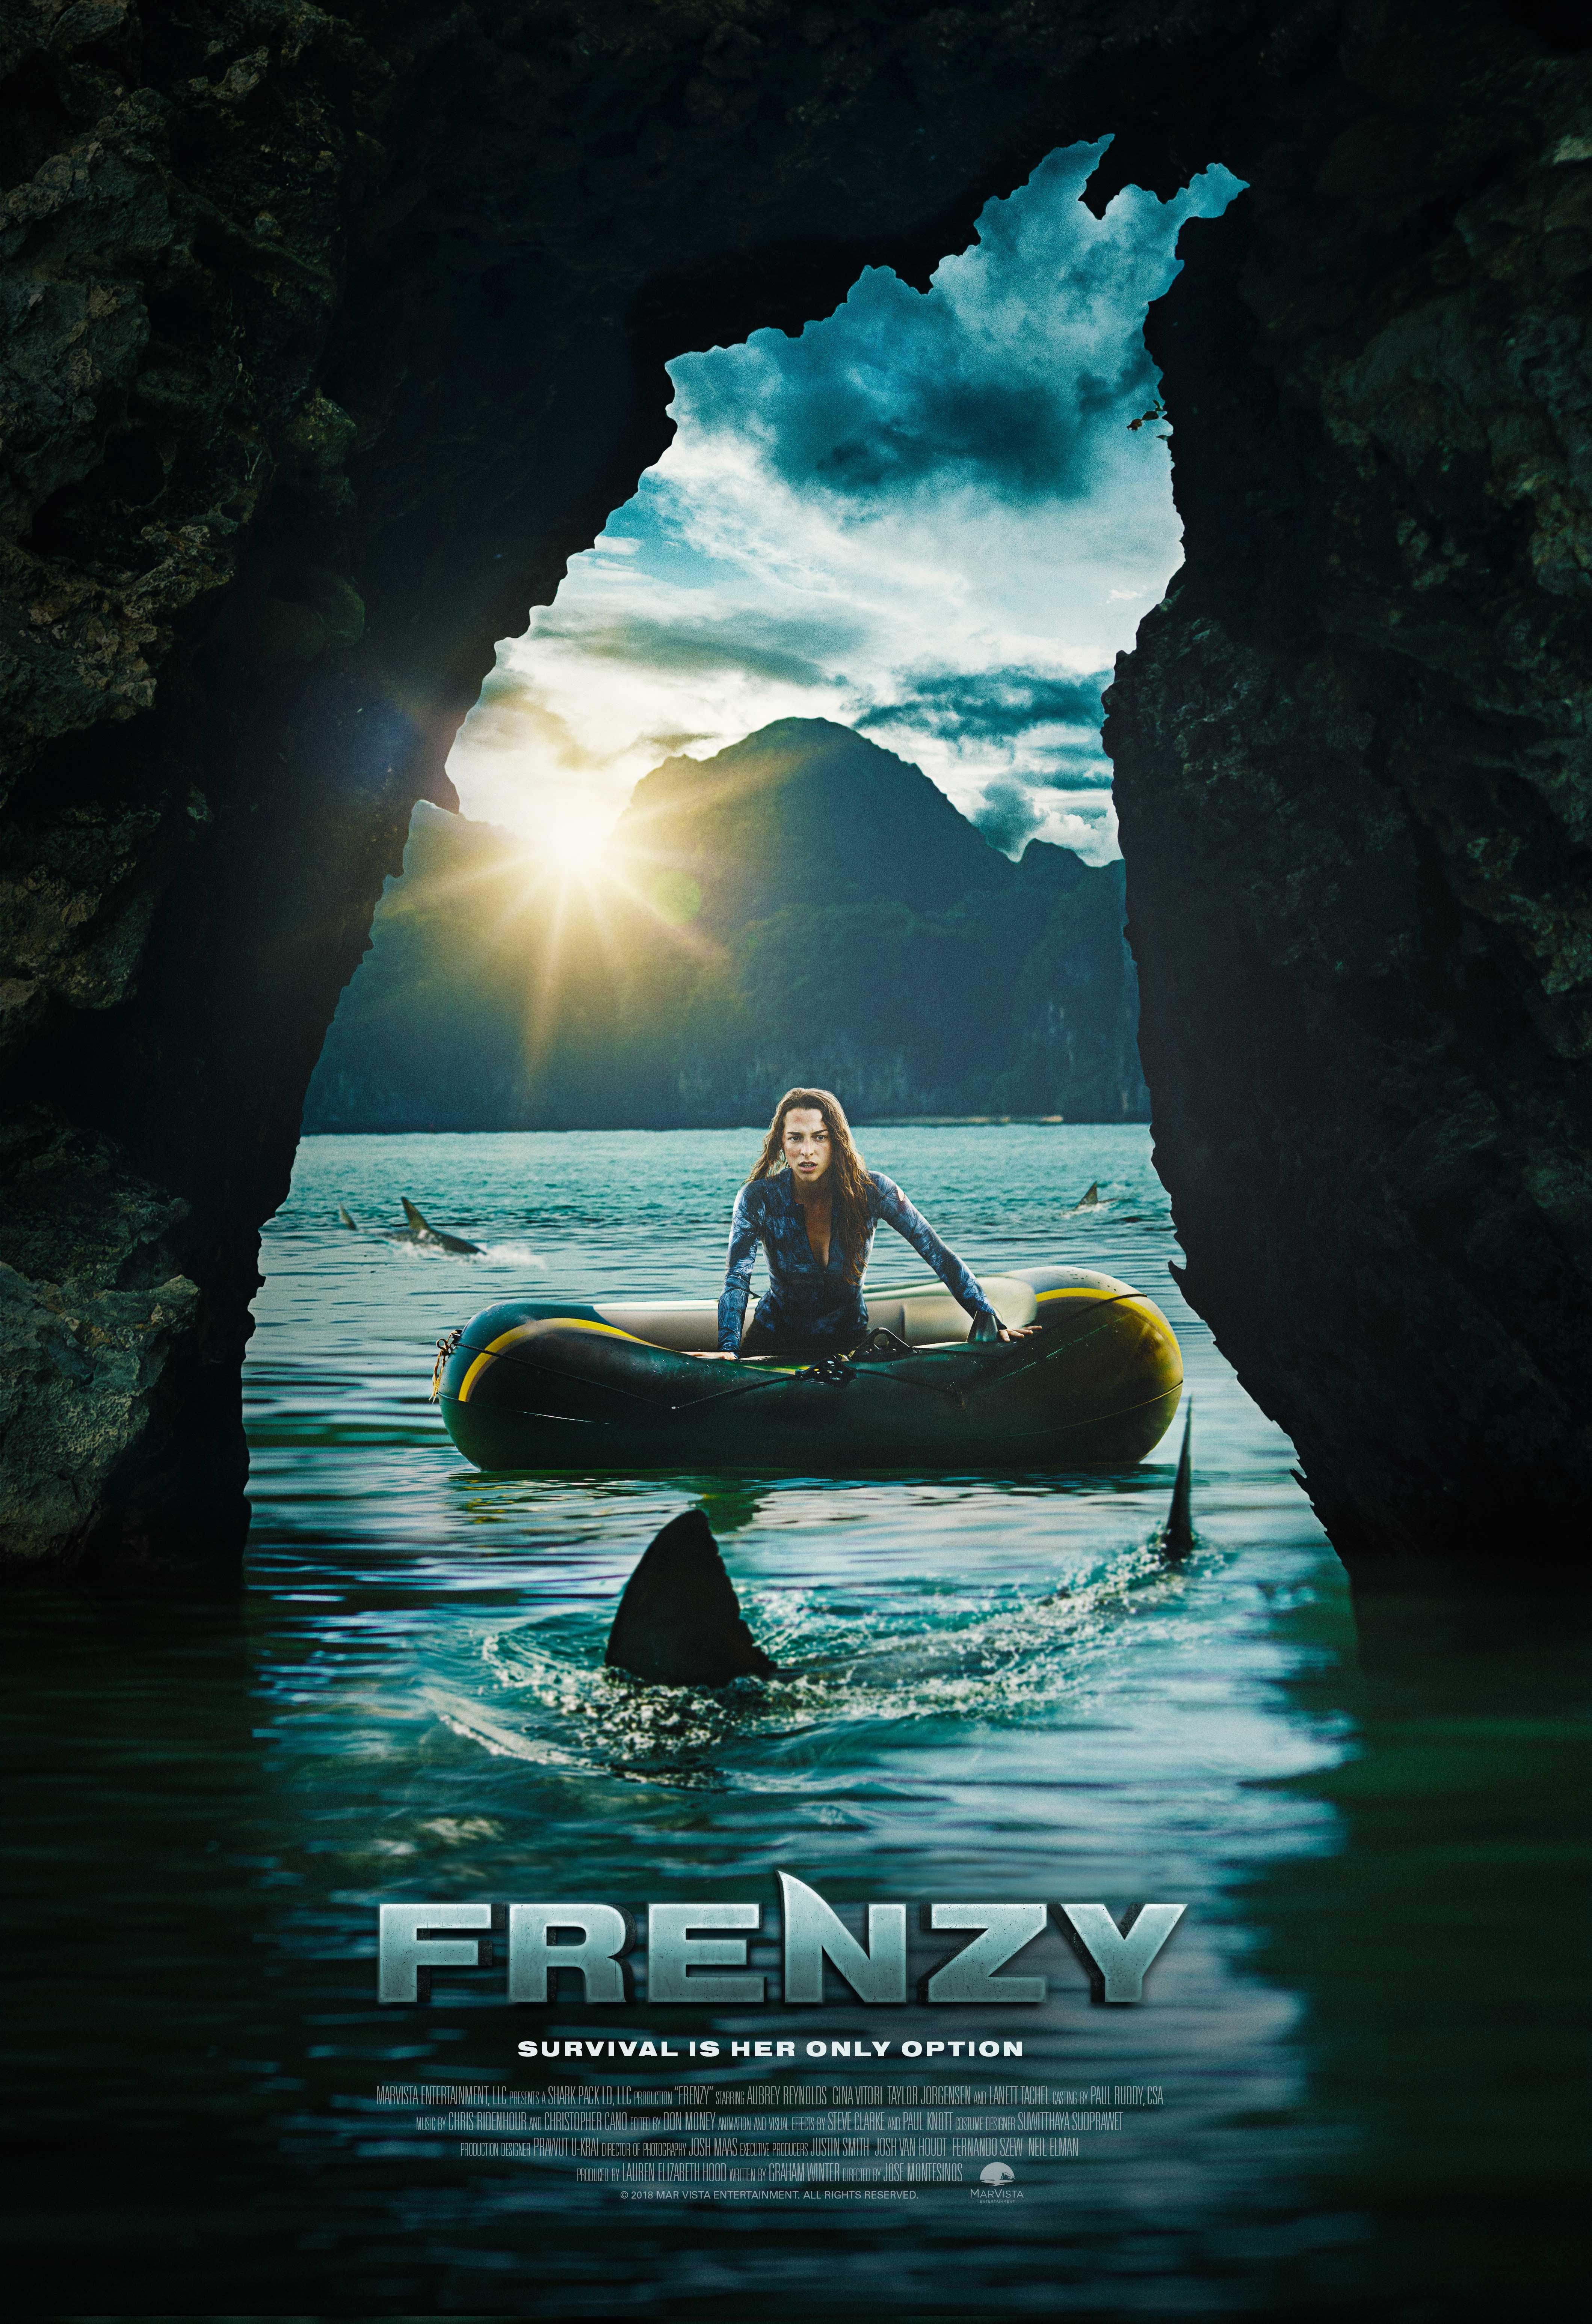 Frenzy (2018) Hindi Dubbed BluRay download full movie